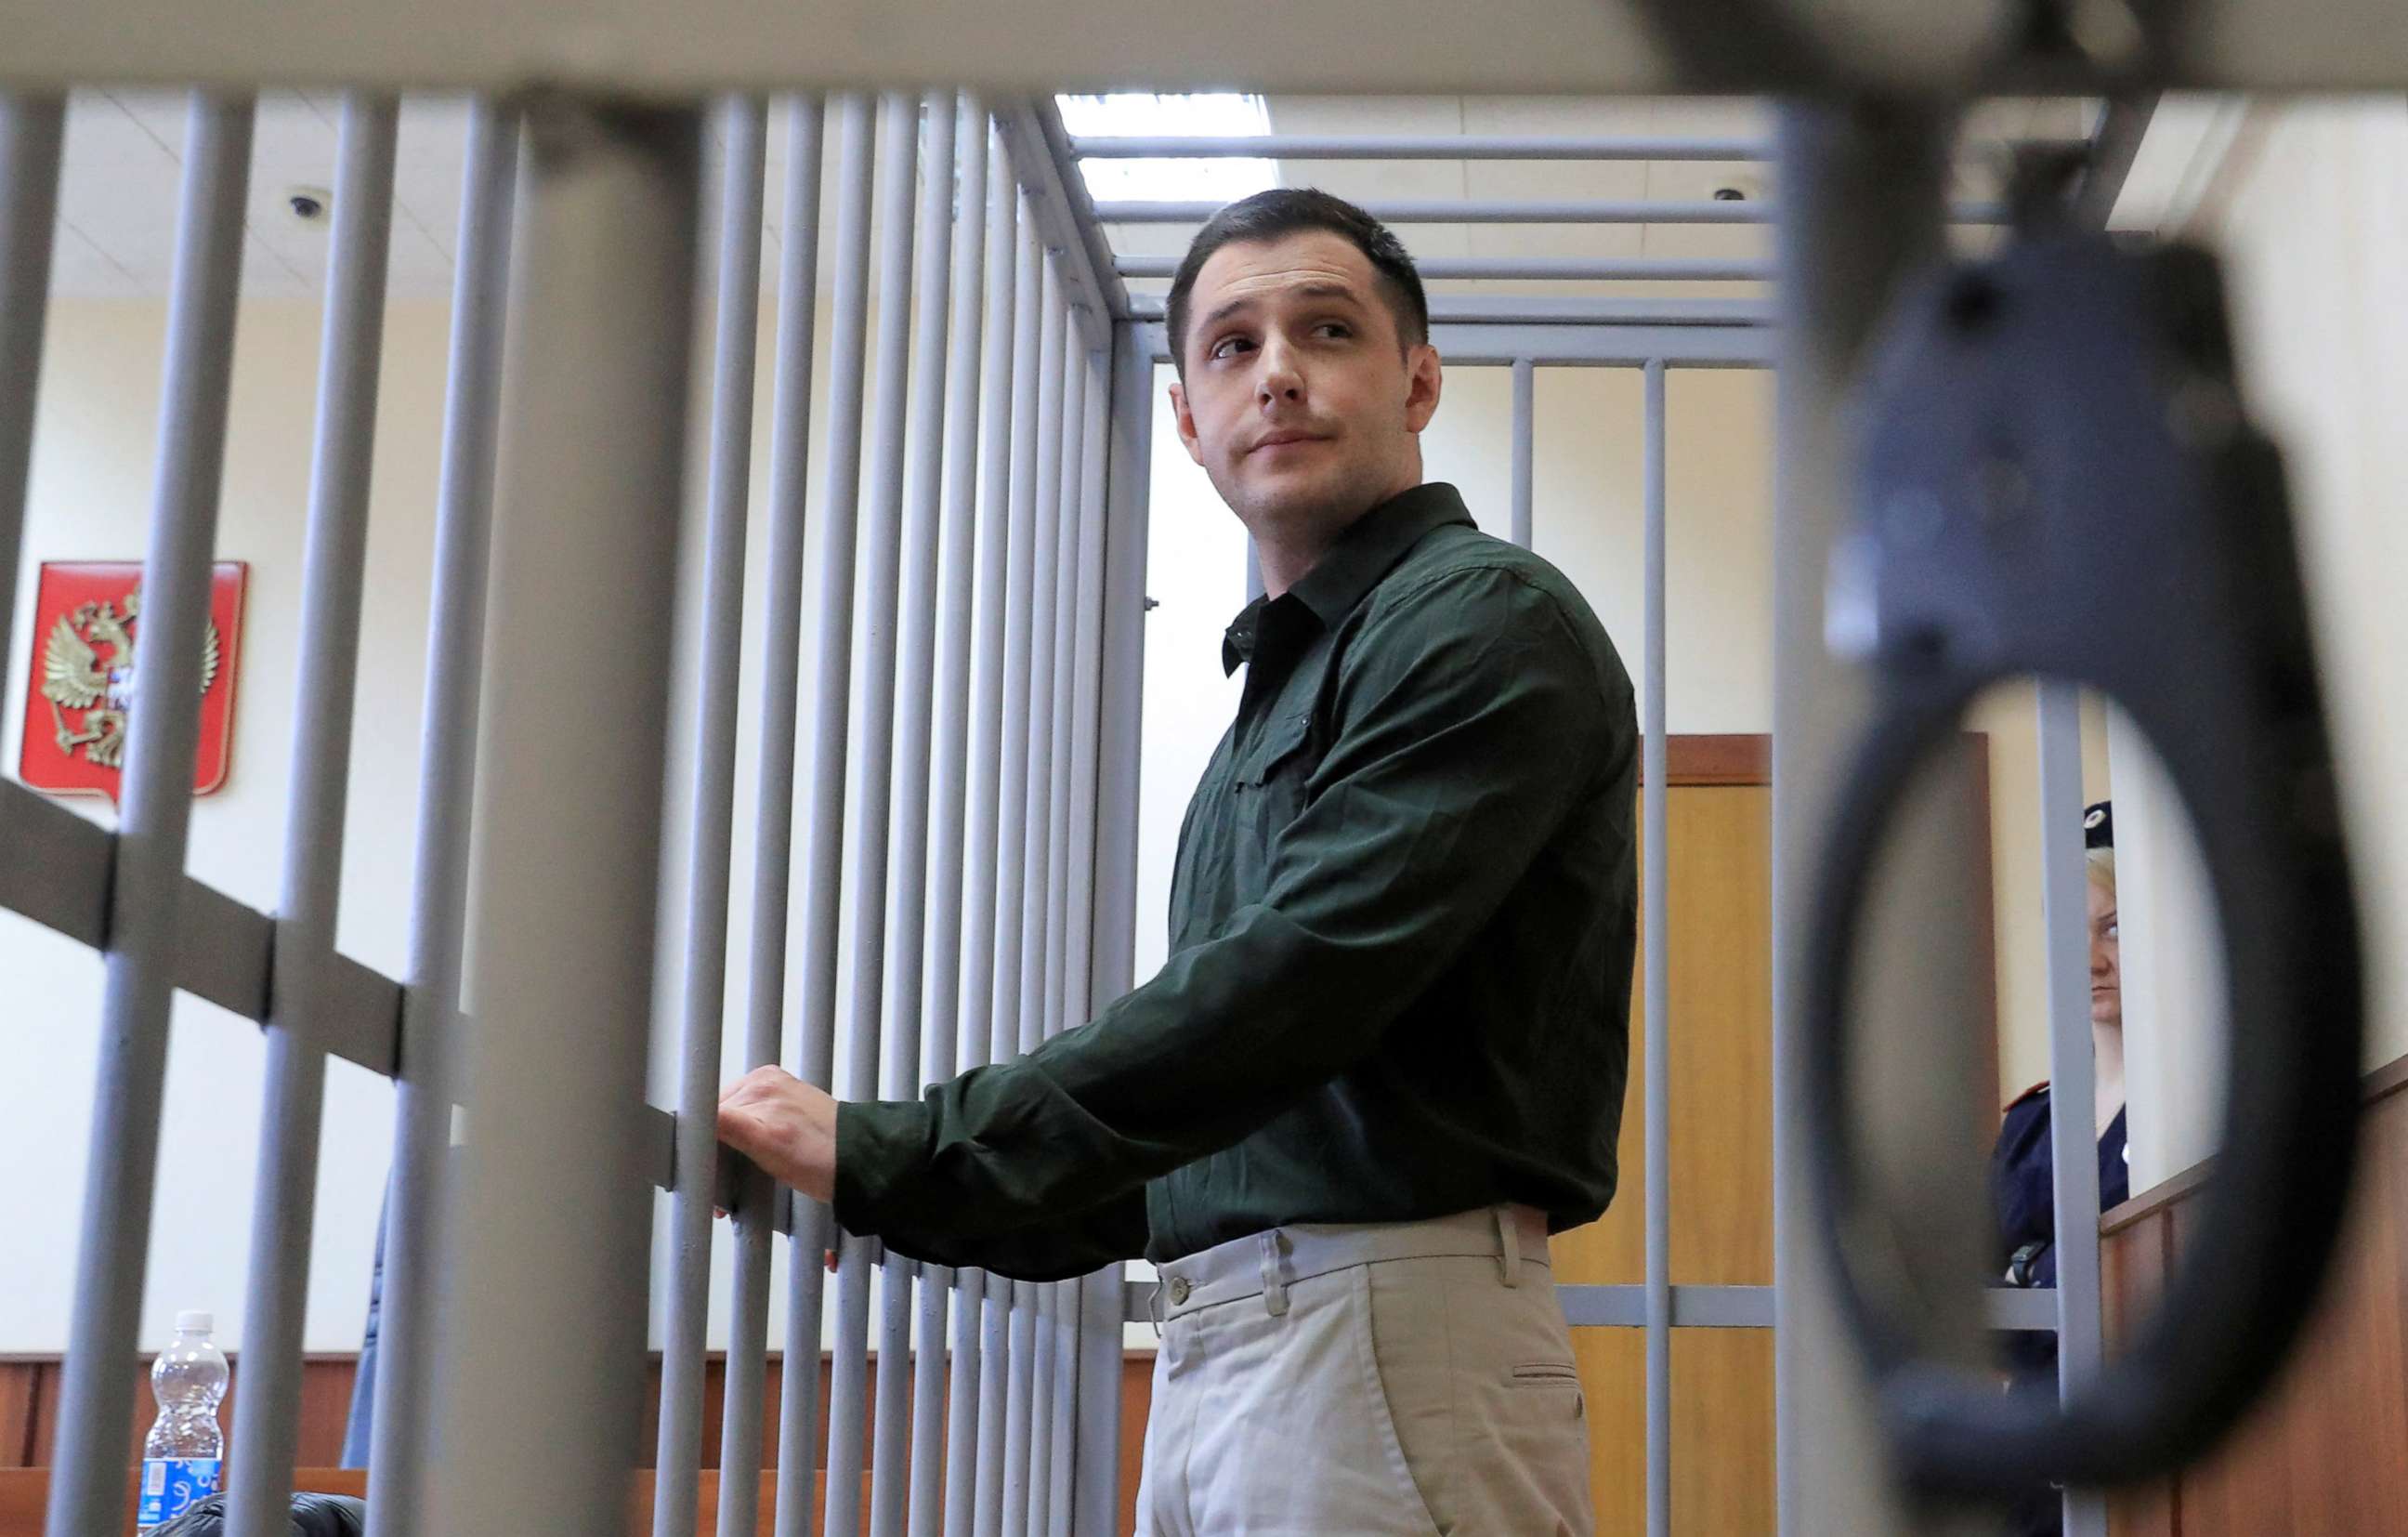 PHOTO:U.S. ex-Marine Trevor Reed, who was detained in 2019 and accused of assaulting police officers, stands inside a defendants' cage during a court hearing in Moscow, March 11, 2020.
